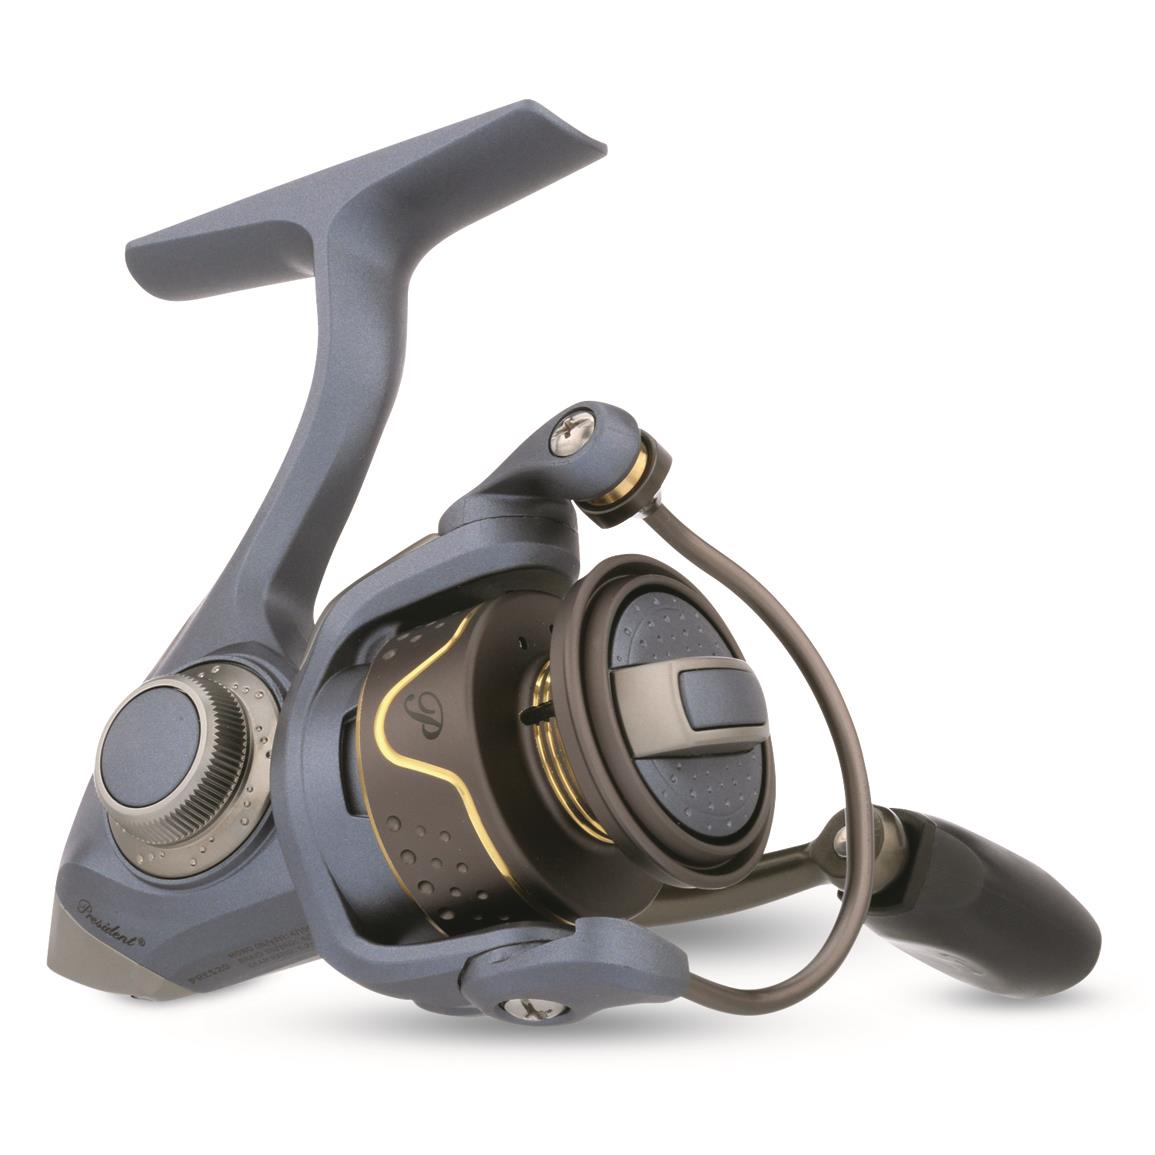 Shimano Nexave FI Spinning Reel, 6.2:1 Gear Ratio, 3000 Size Reel - 725609, Spinning  Reels at Sportsman's Guide